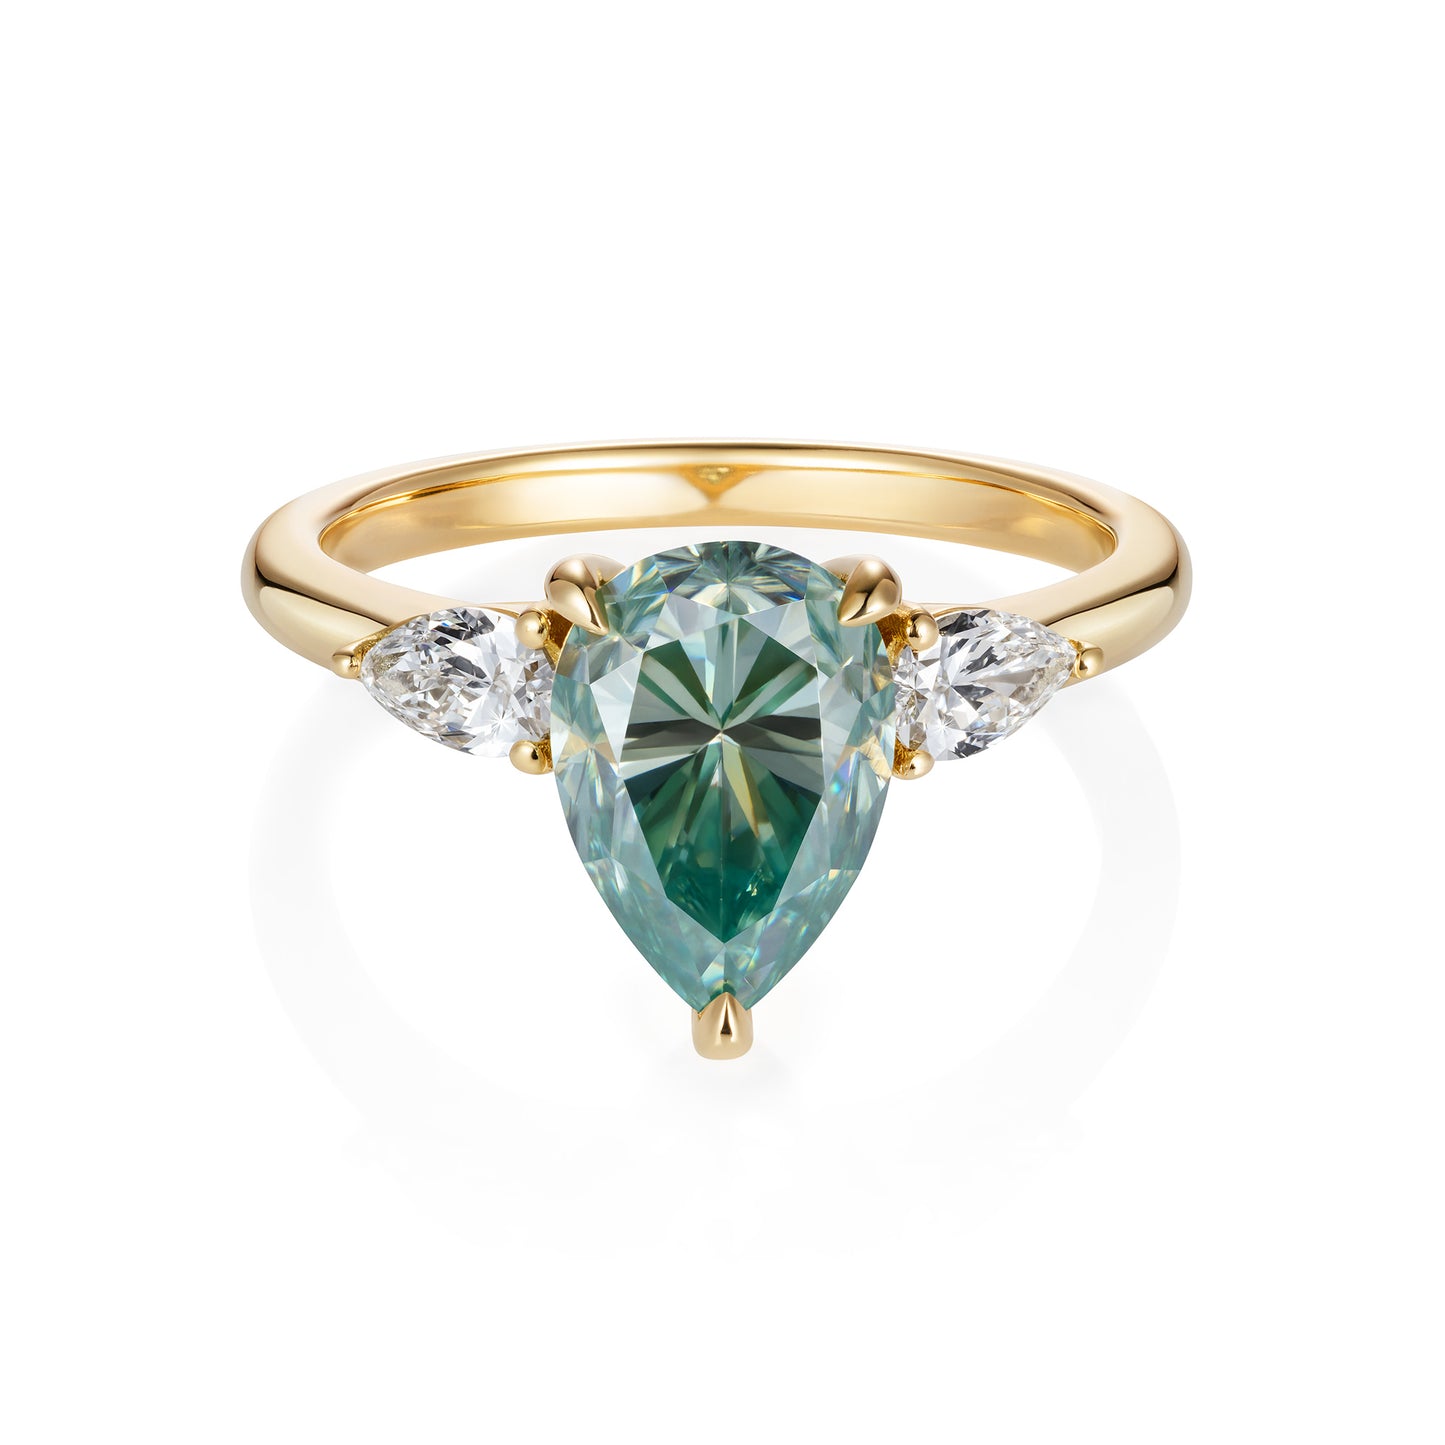 Teal pear shaped moissanite trilogy ring with lab-grown pear shaped side diamonds